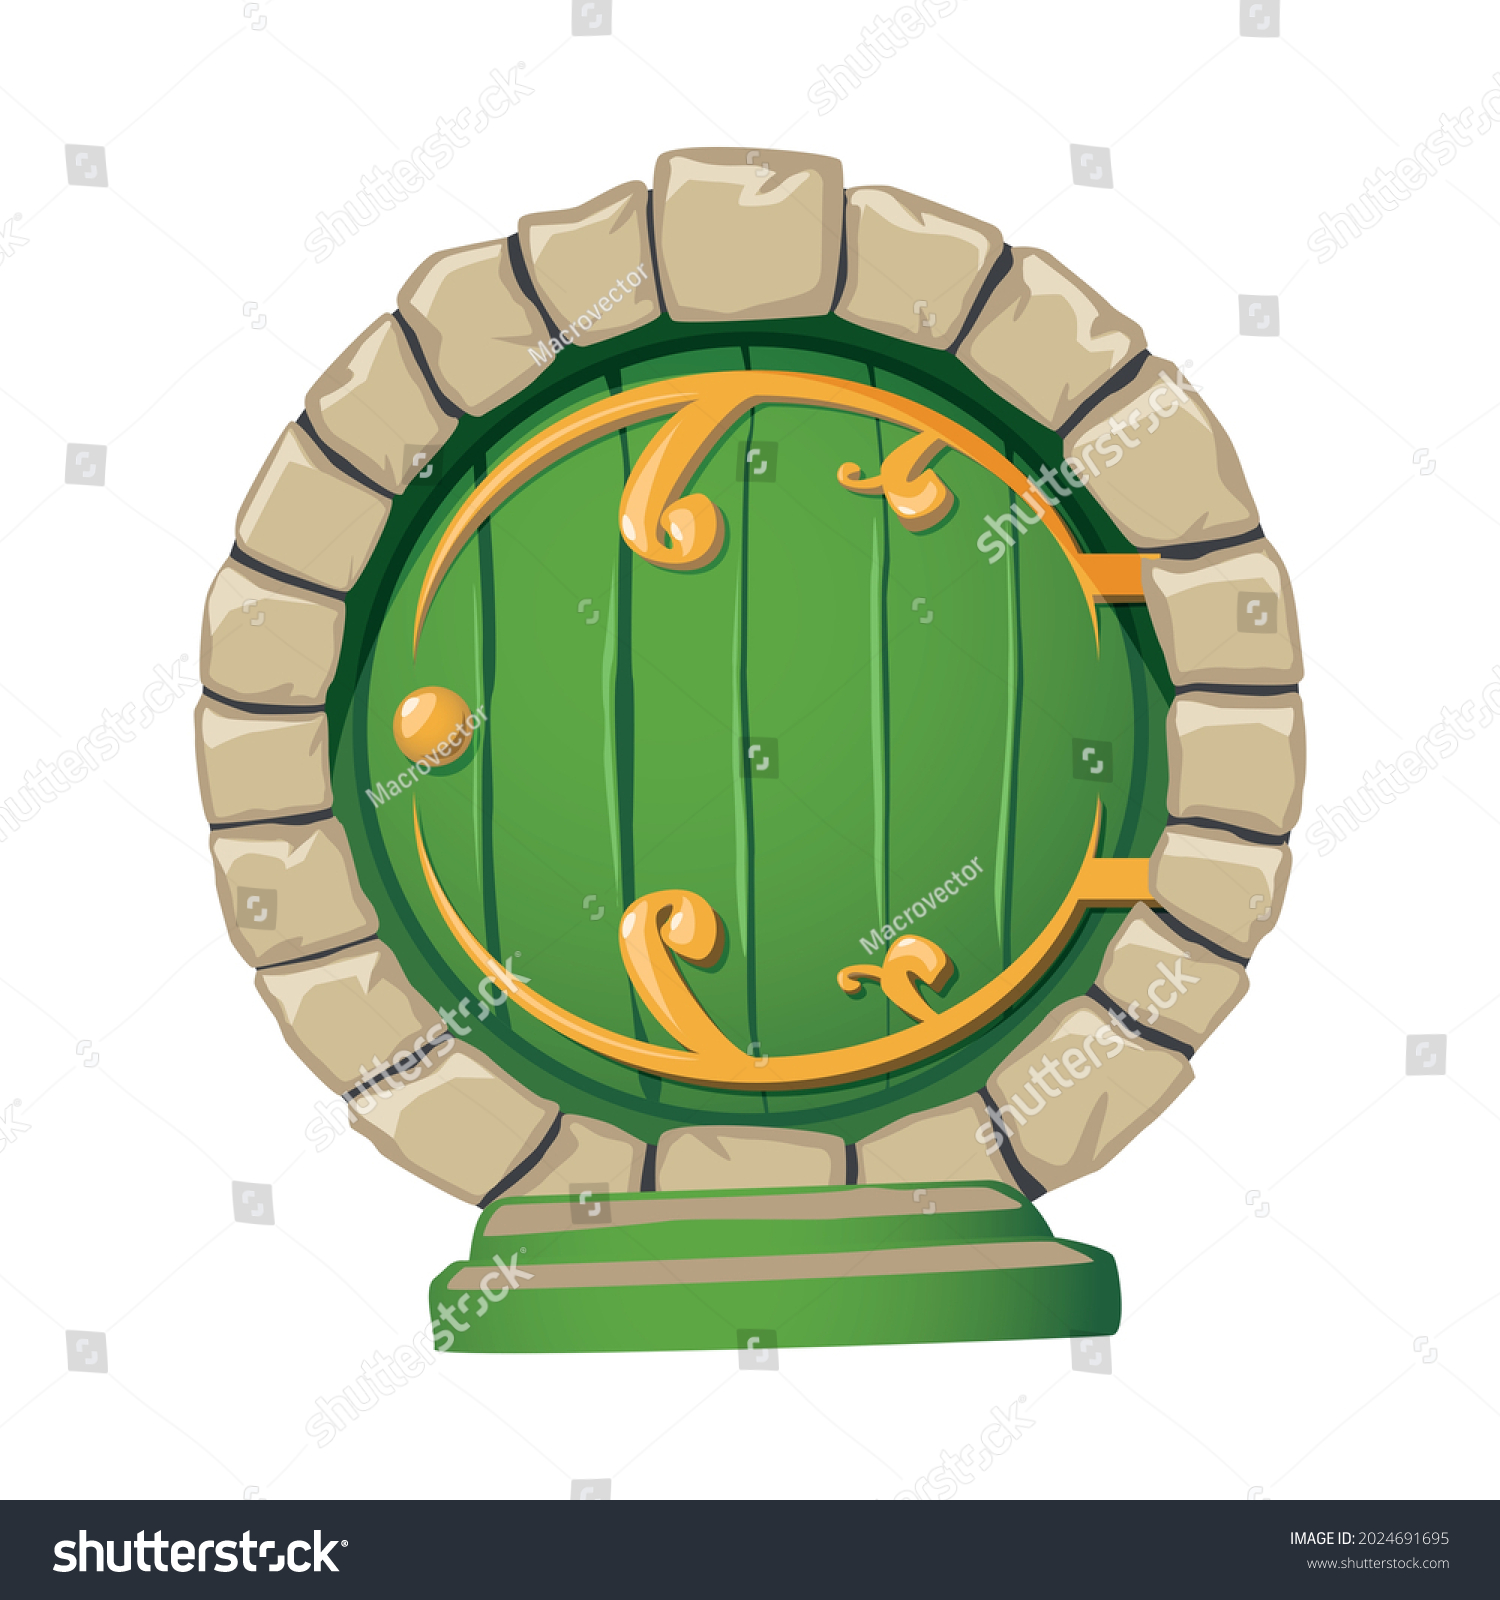 SVG of Cartoon doors composition with isolated image of round door of fantasy hobbits house vector illustration svg